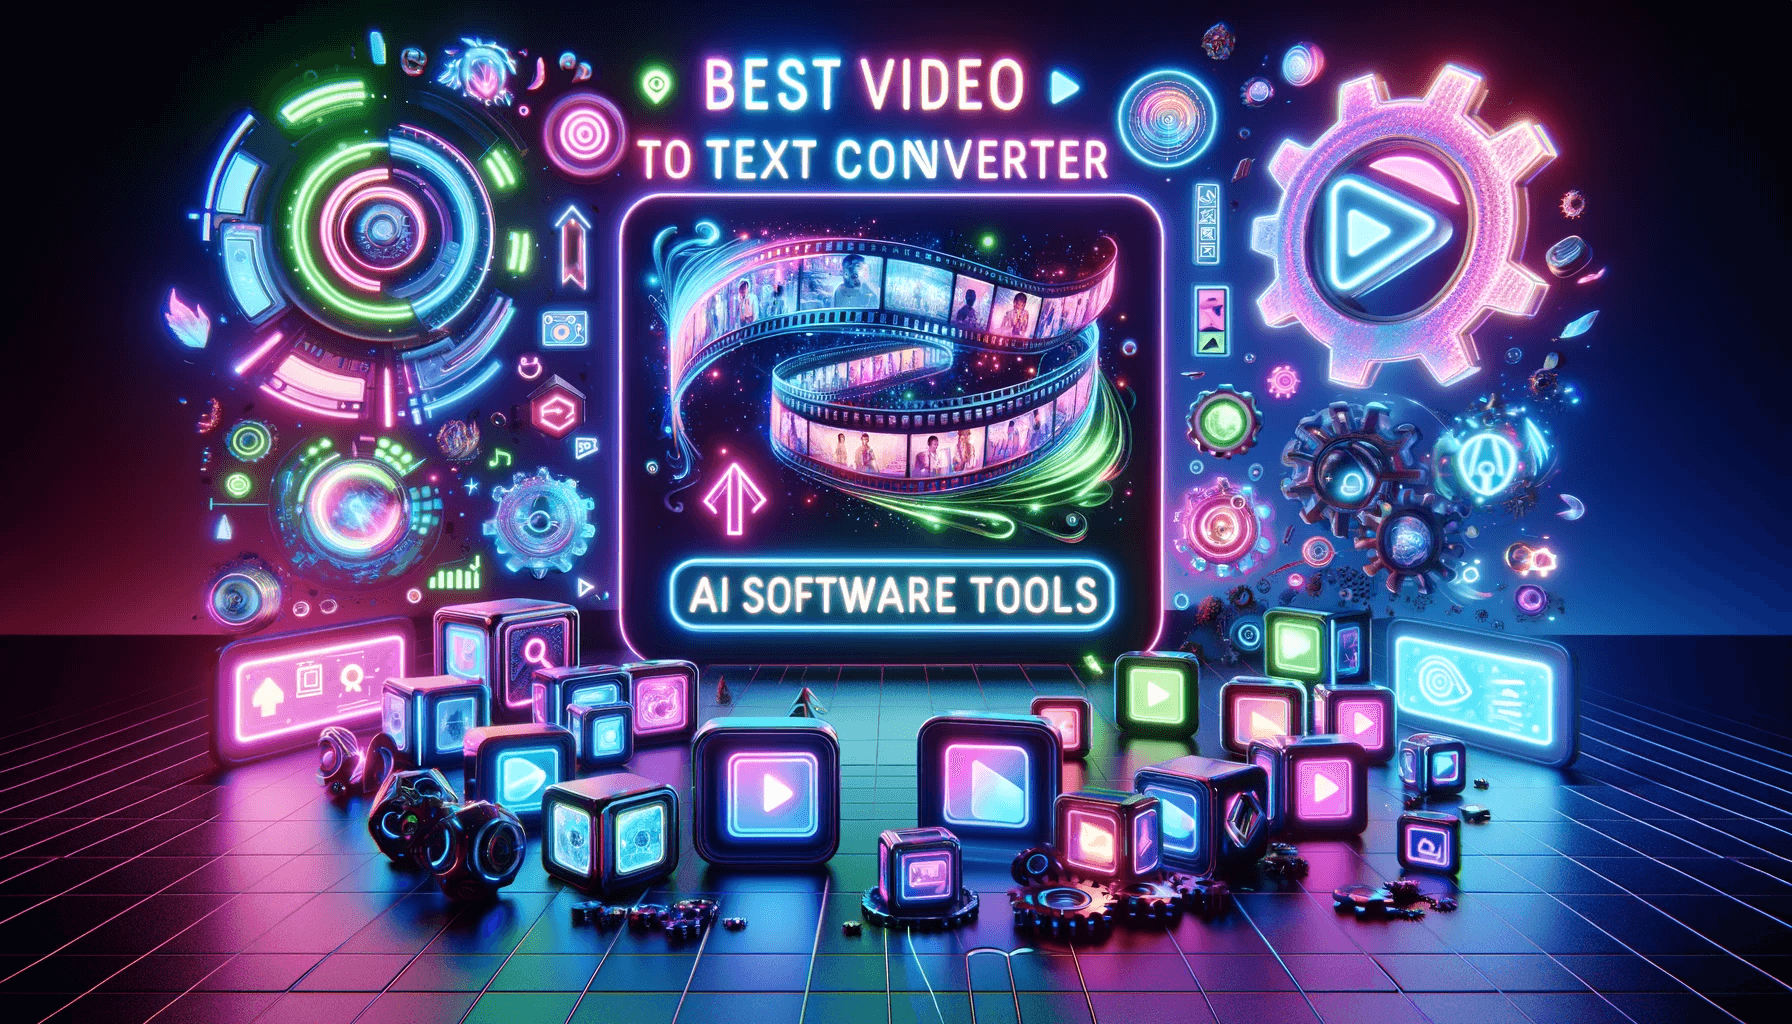 10 Best Video to Text Converter AI Software Tools